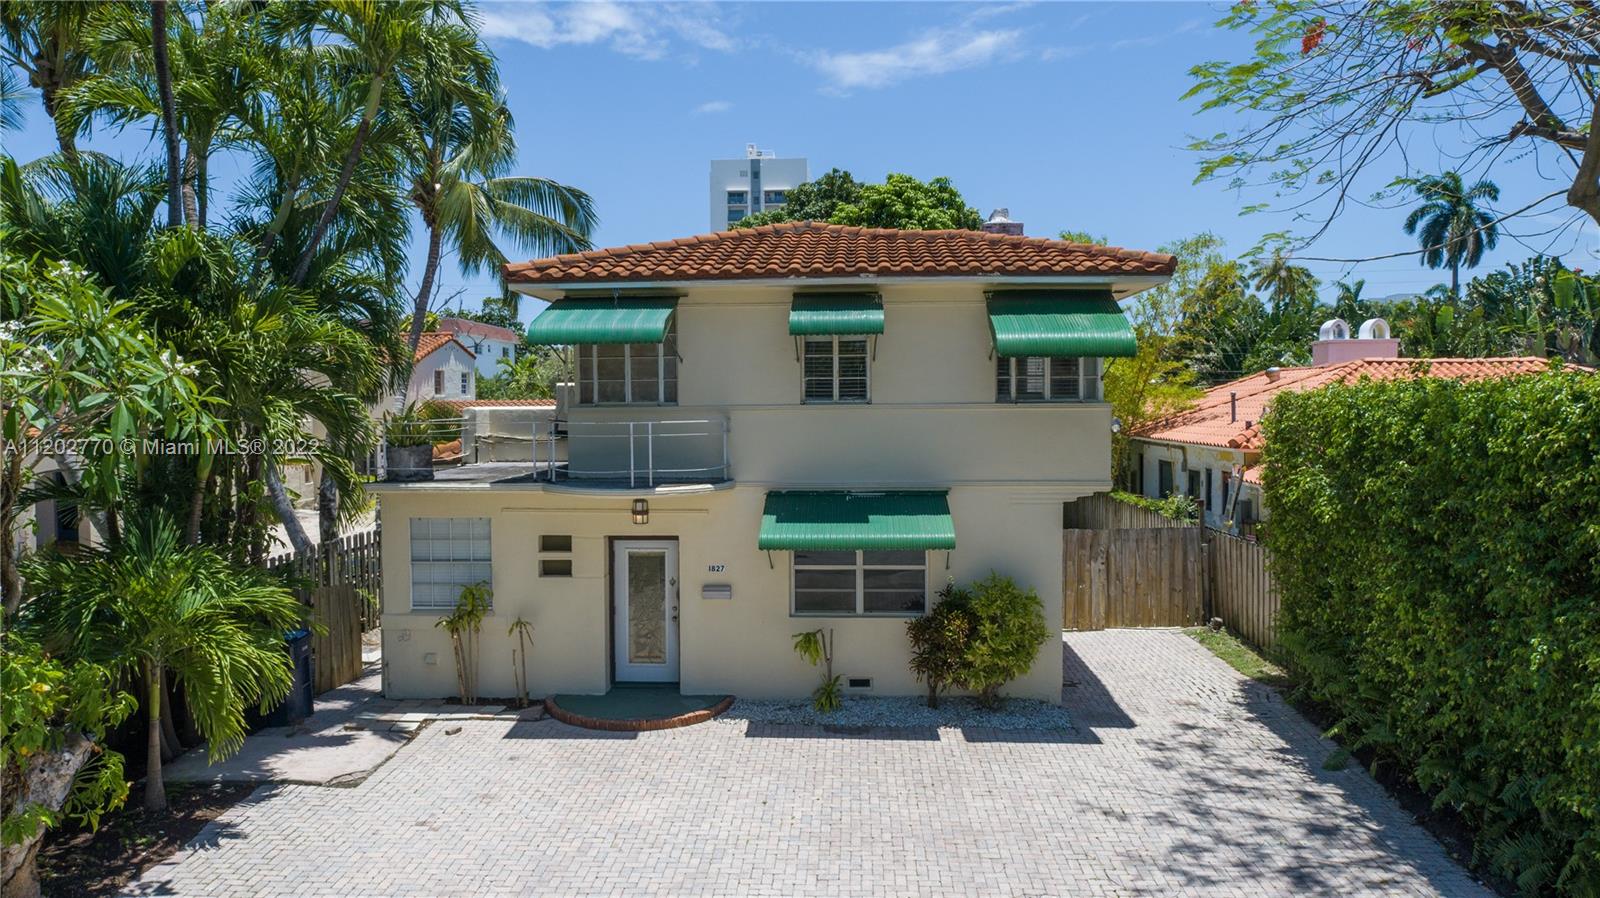 Amazing opportunity to own in Miami Beach! This hidden oasis is located on a quiet cul-de-sac just a couple blocks away from Lincoln Road, shops, restaurants, Pride Park and the Convention Center. Walkable distance to Trader Joe's and Publix and only a short bike ride to the beautiful beaches and Ocean Drive. This 5/3 two story home sits on a 7,500 sq. ft. lot with large fruit trees and plenty of room for a pool. This home is ready for a full rehab to make this your tropical oasis. Bring offers as this property is priced to sell and will not last! Showings by appointments only, 24 hrs notice.